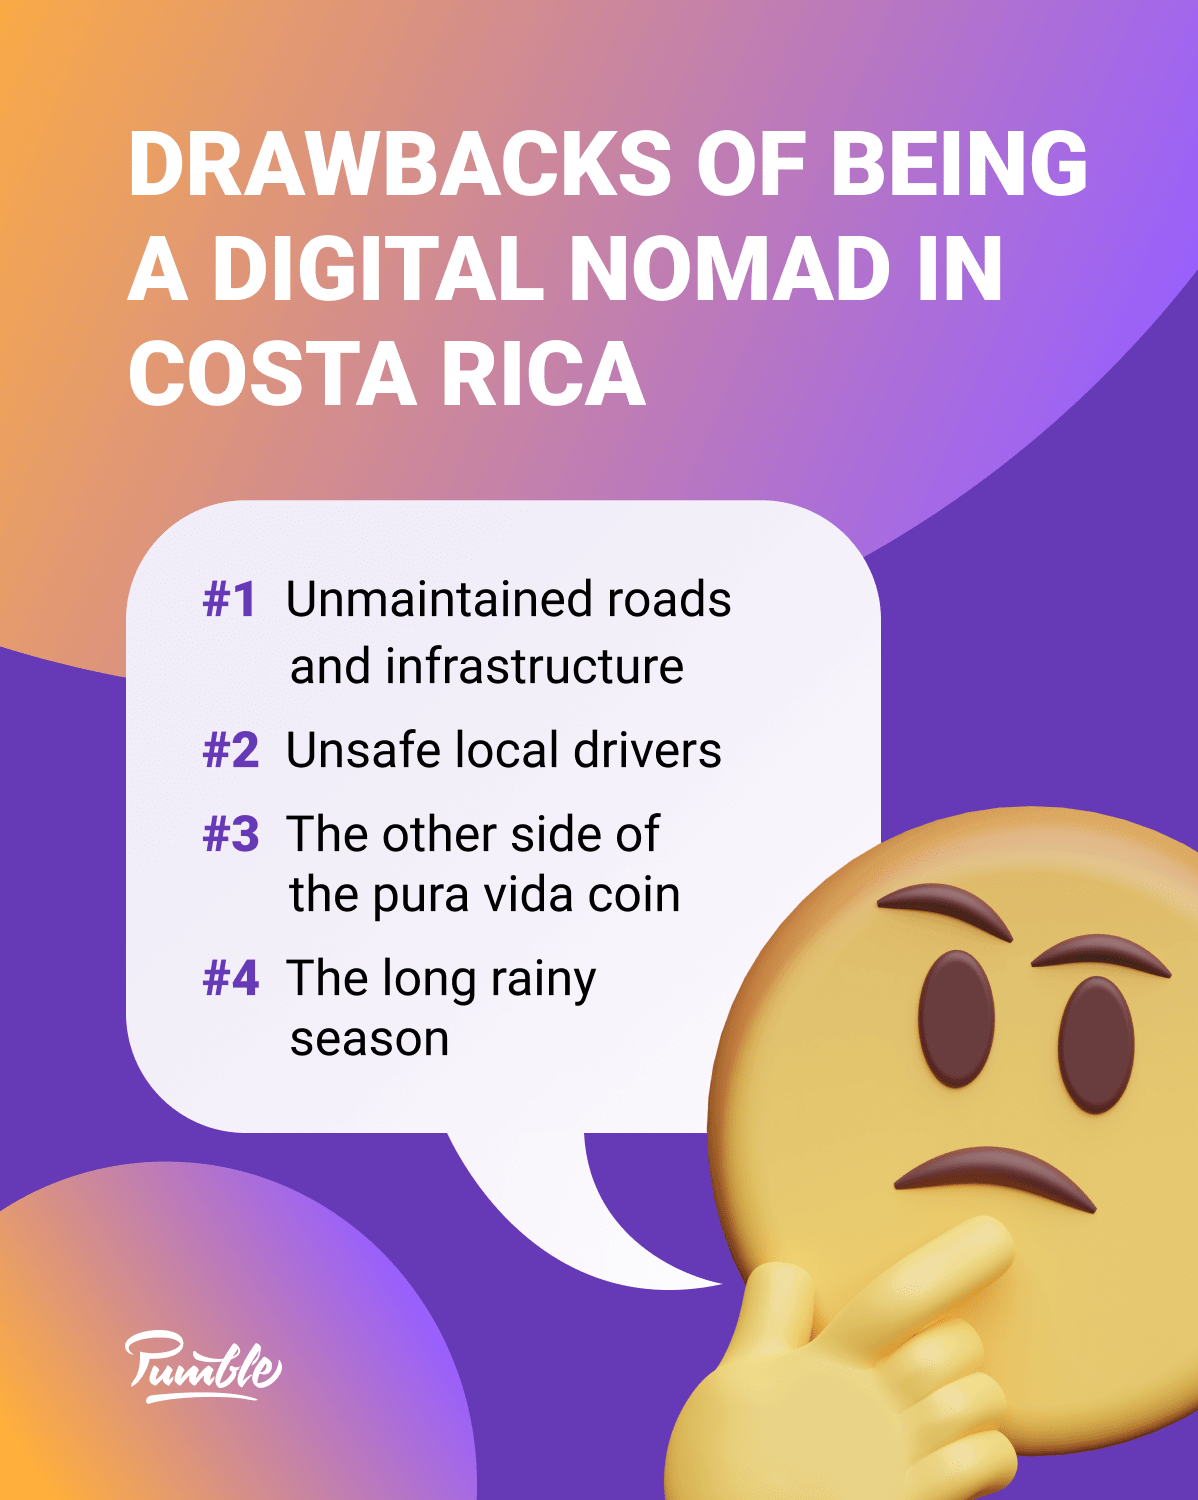 Drawbacks of being a digital nomad in Costa Rica